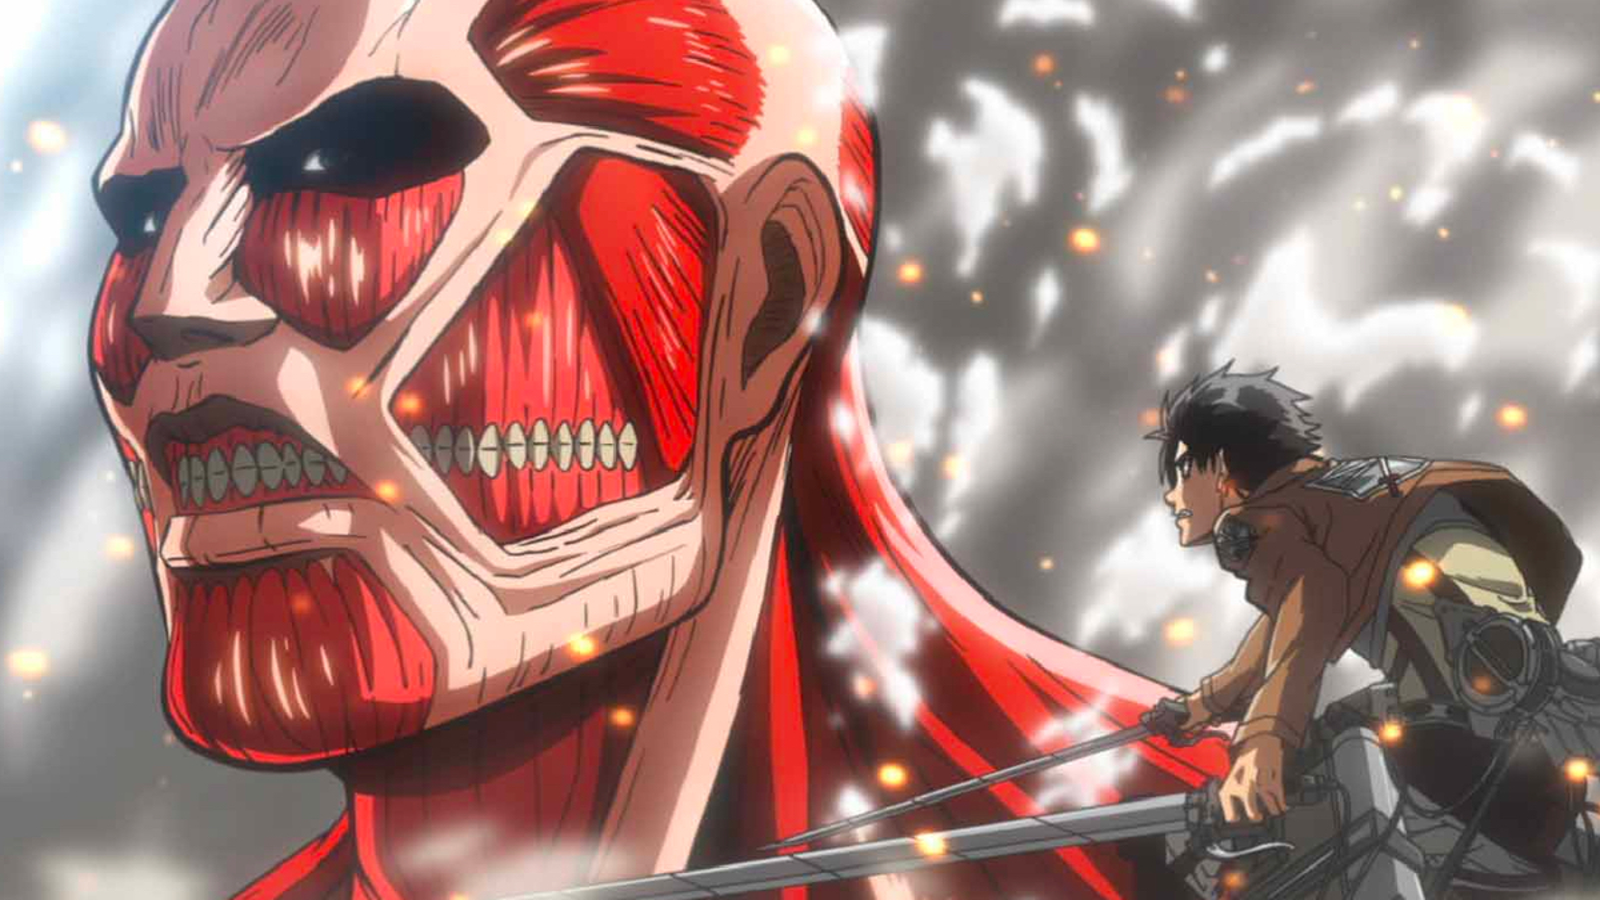 How to watch Attack on Titan in order